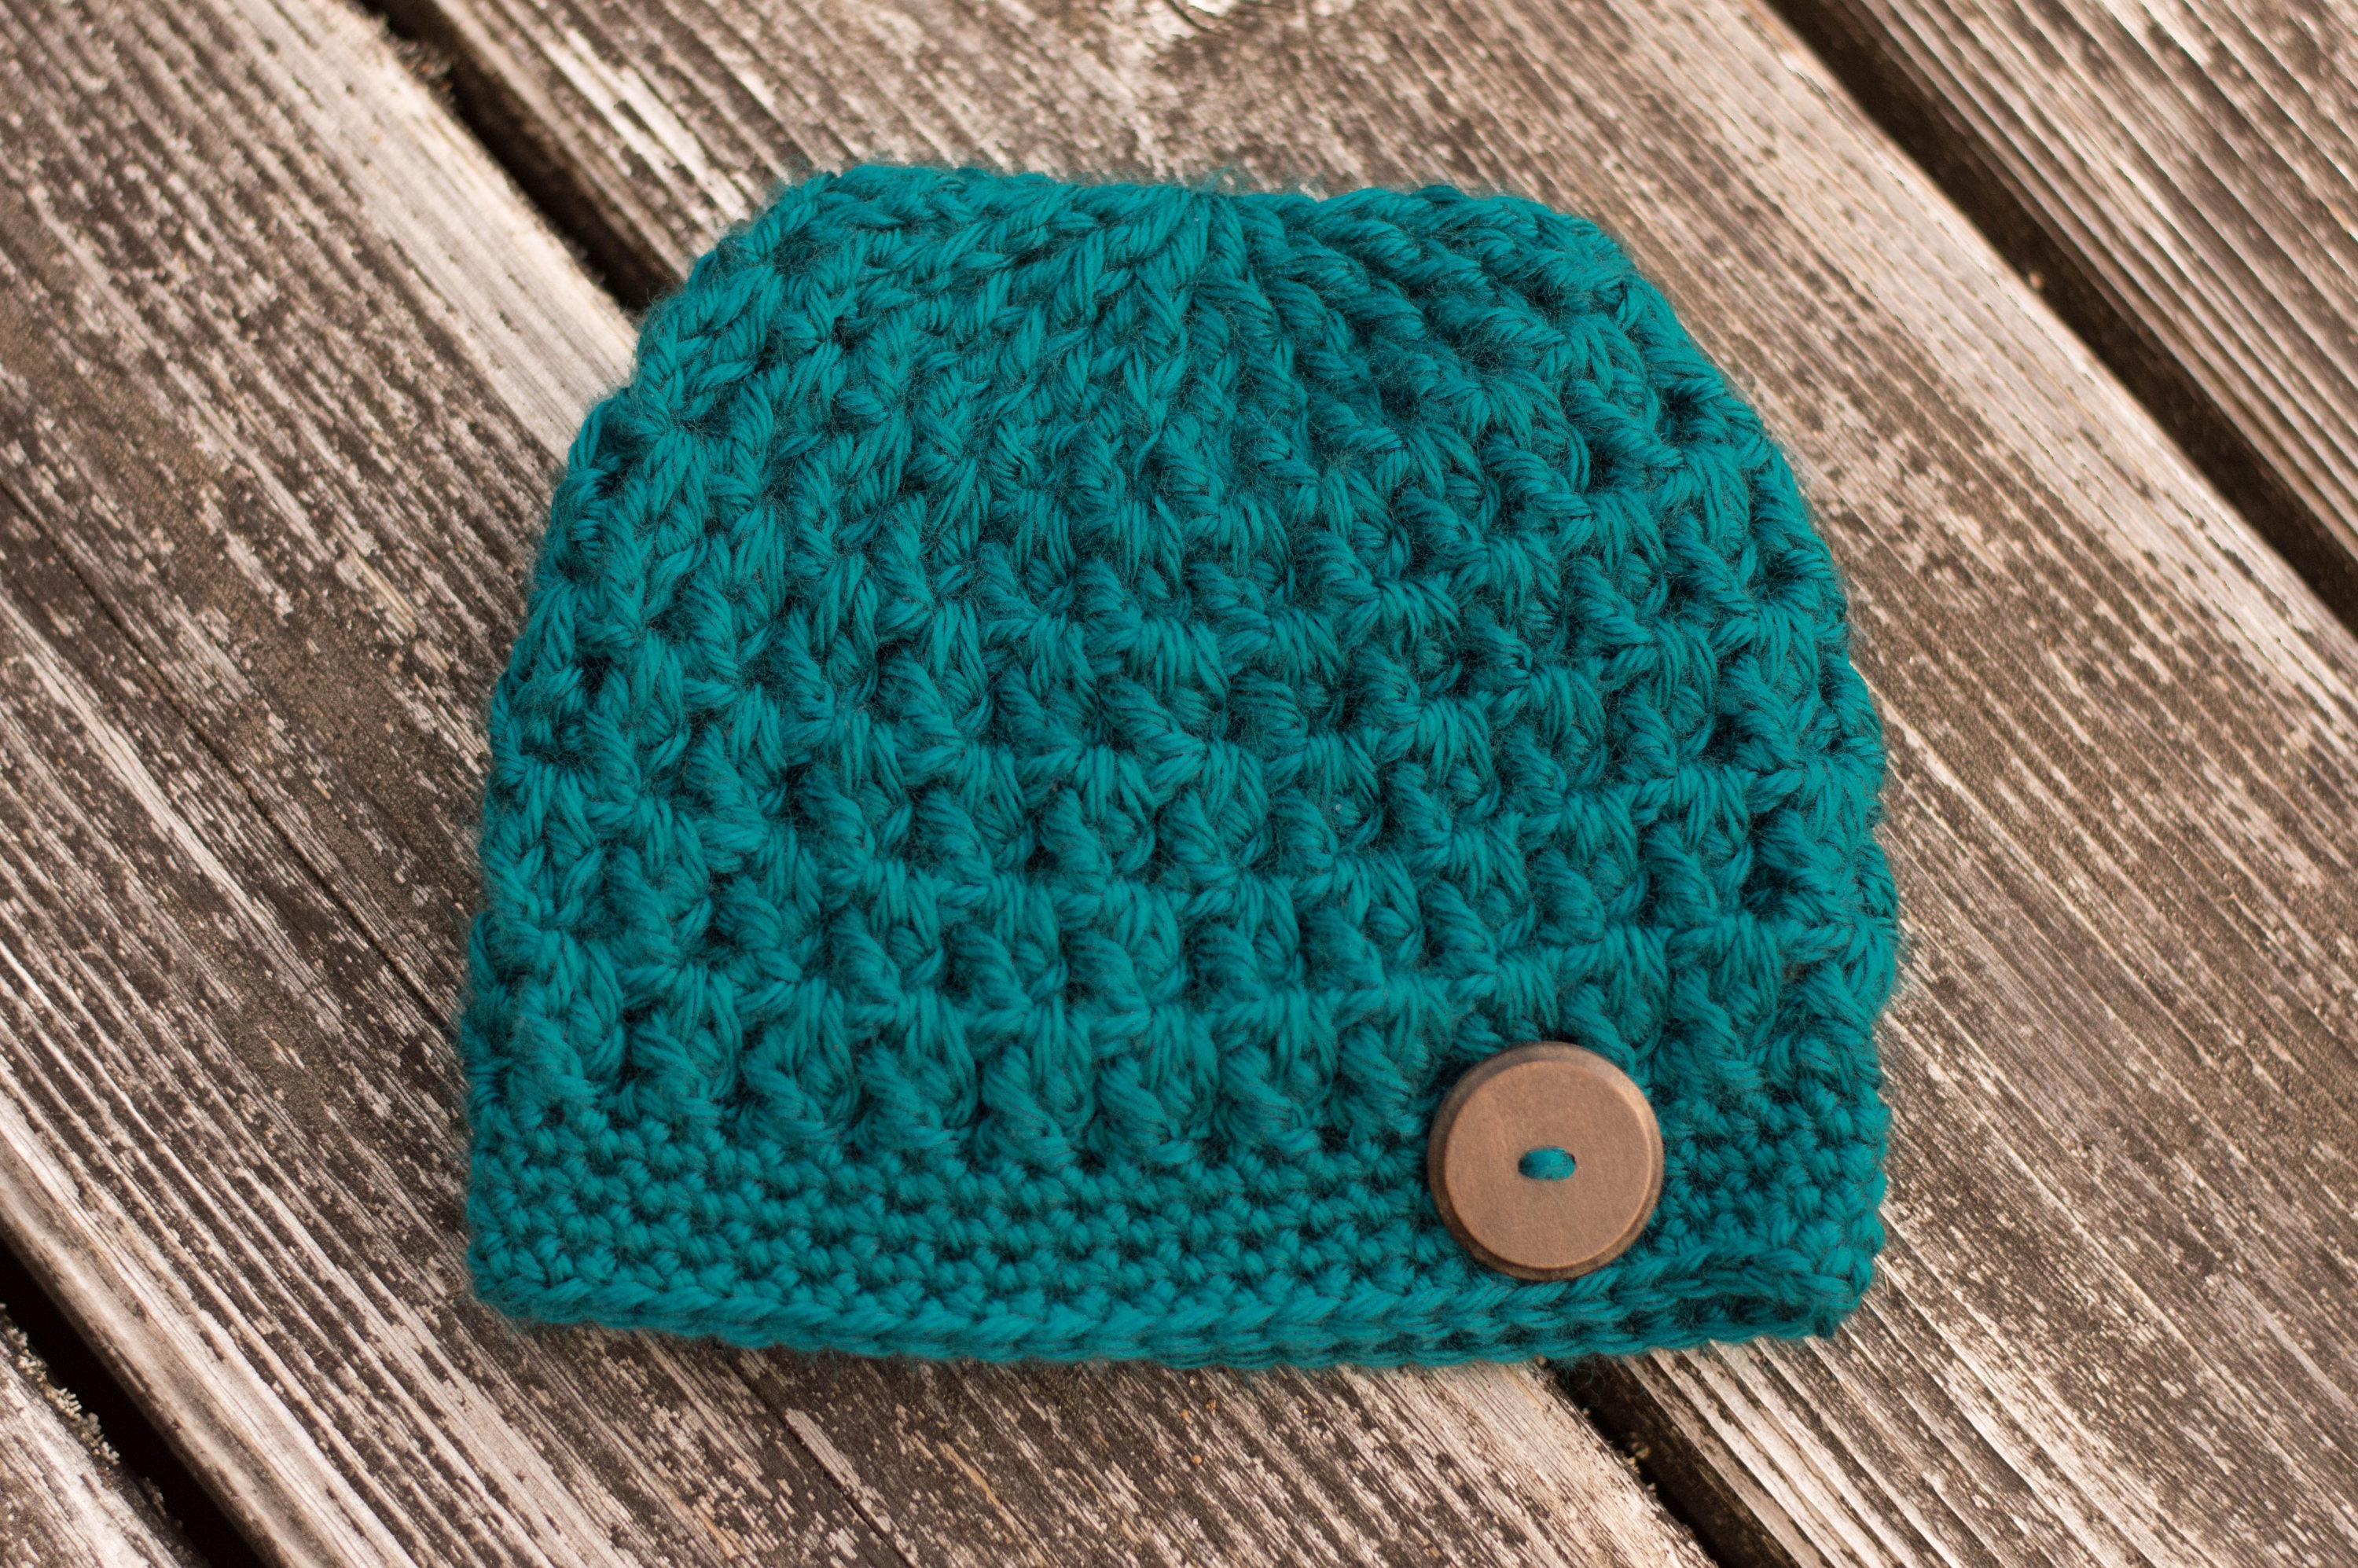 handmade crochet 6-12 month beanie with wood button